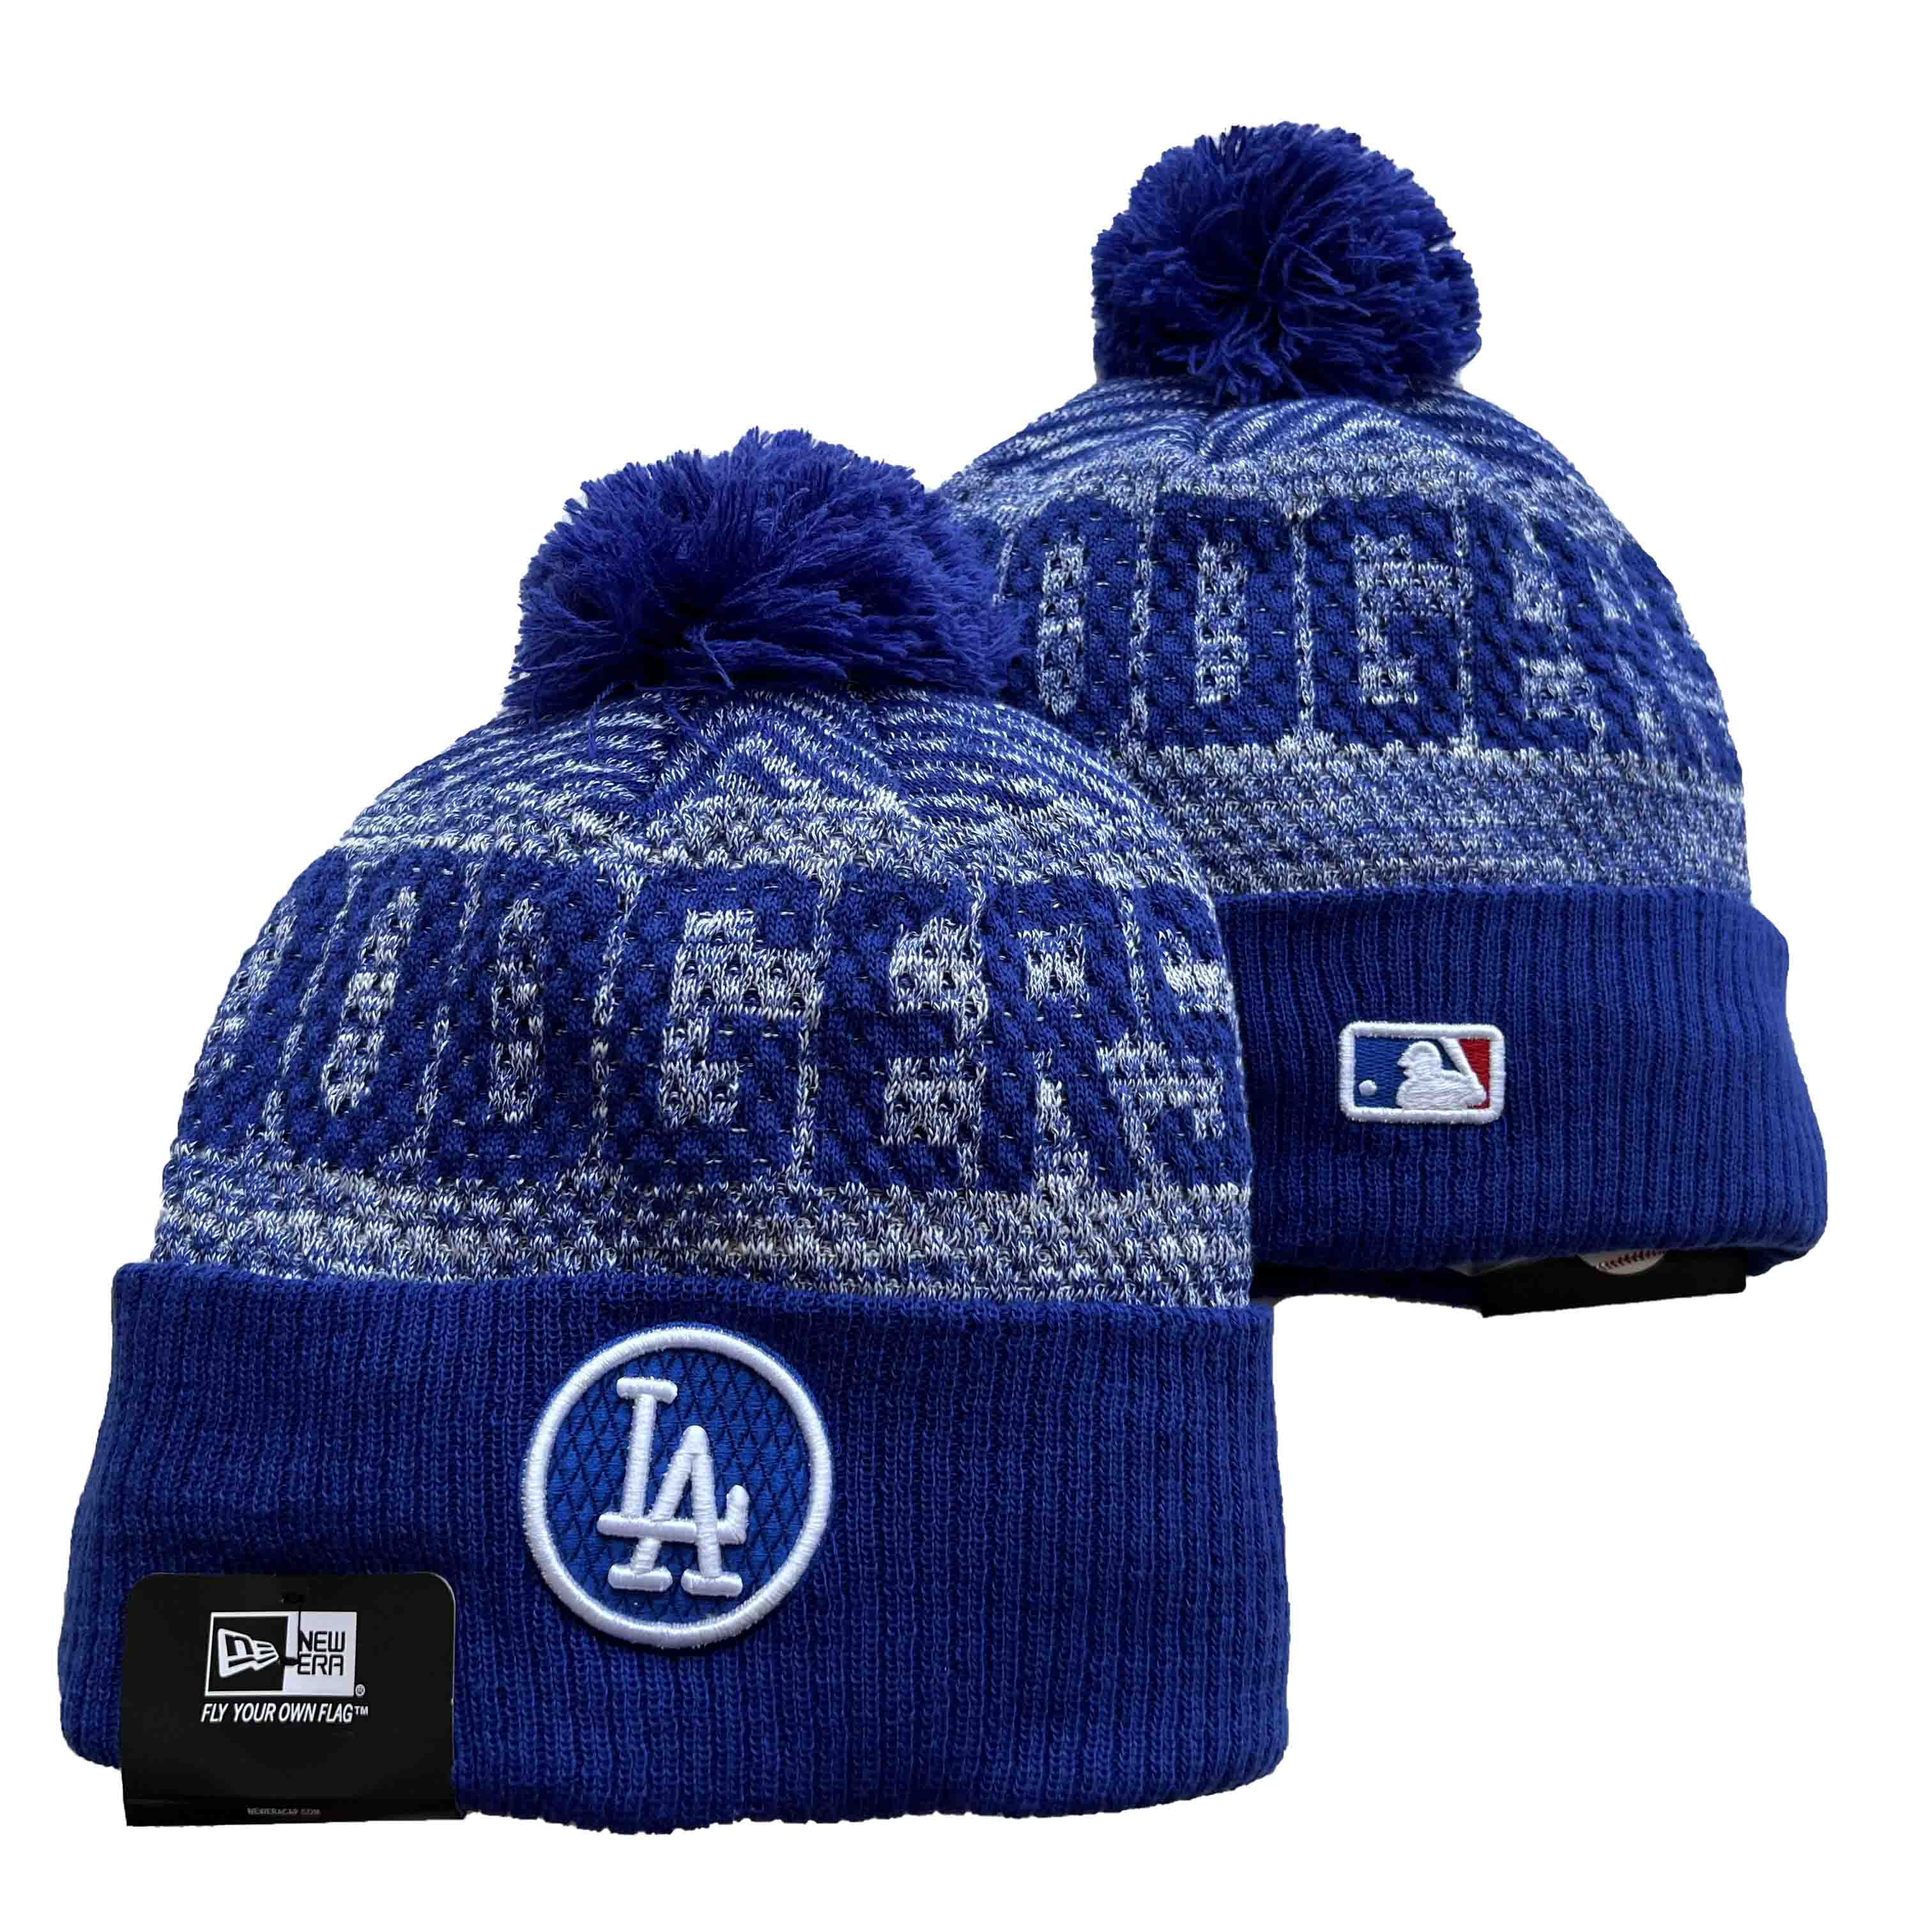 MLB Los Angeles Dodgers Beanies Knit Hats-YD131